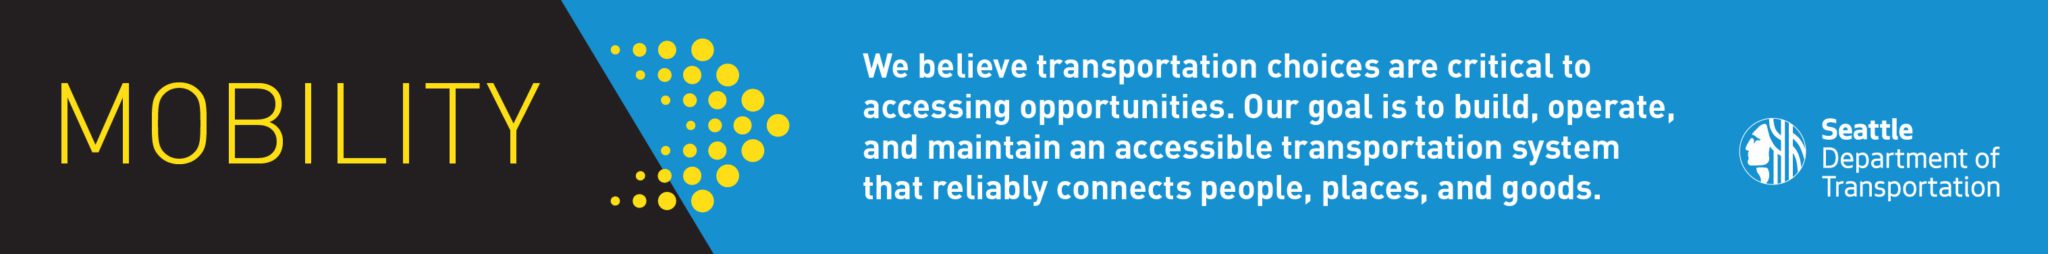 Mobility is one of SDOT's core values and goals. This graphic icon includes the word "Mobility" with a brief description of its meaning, and the SDOT logo.